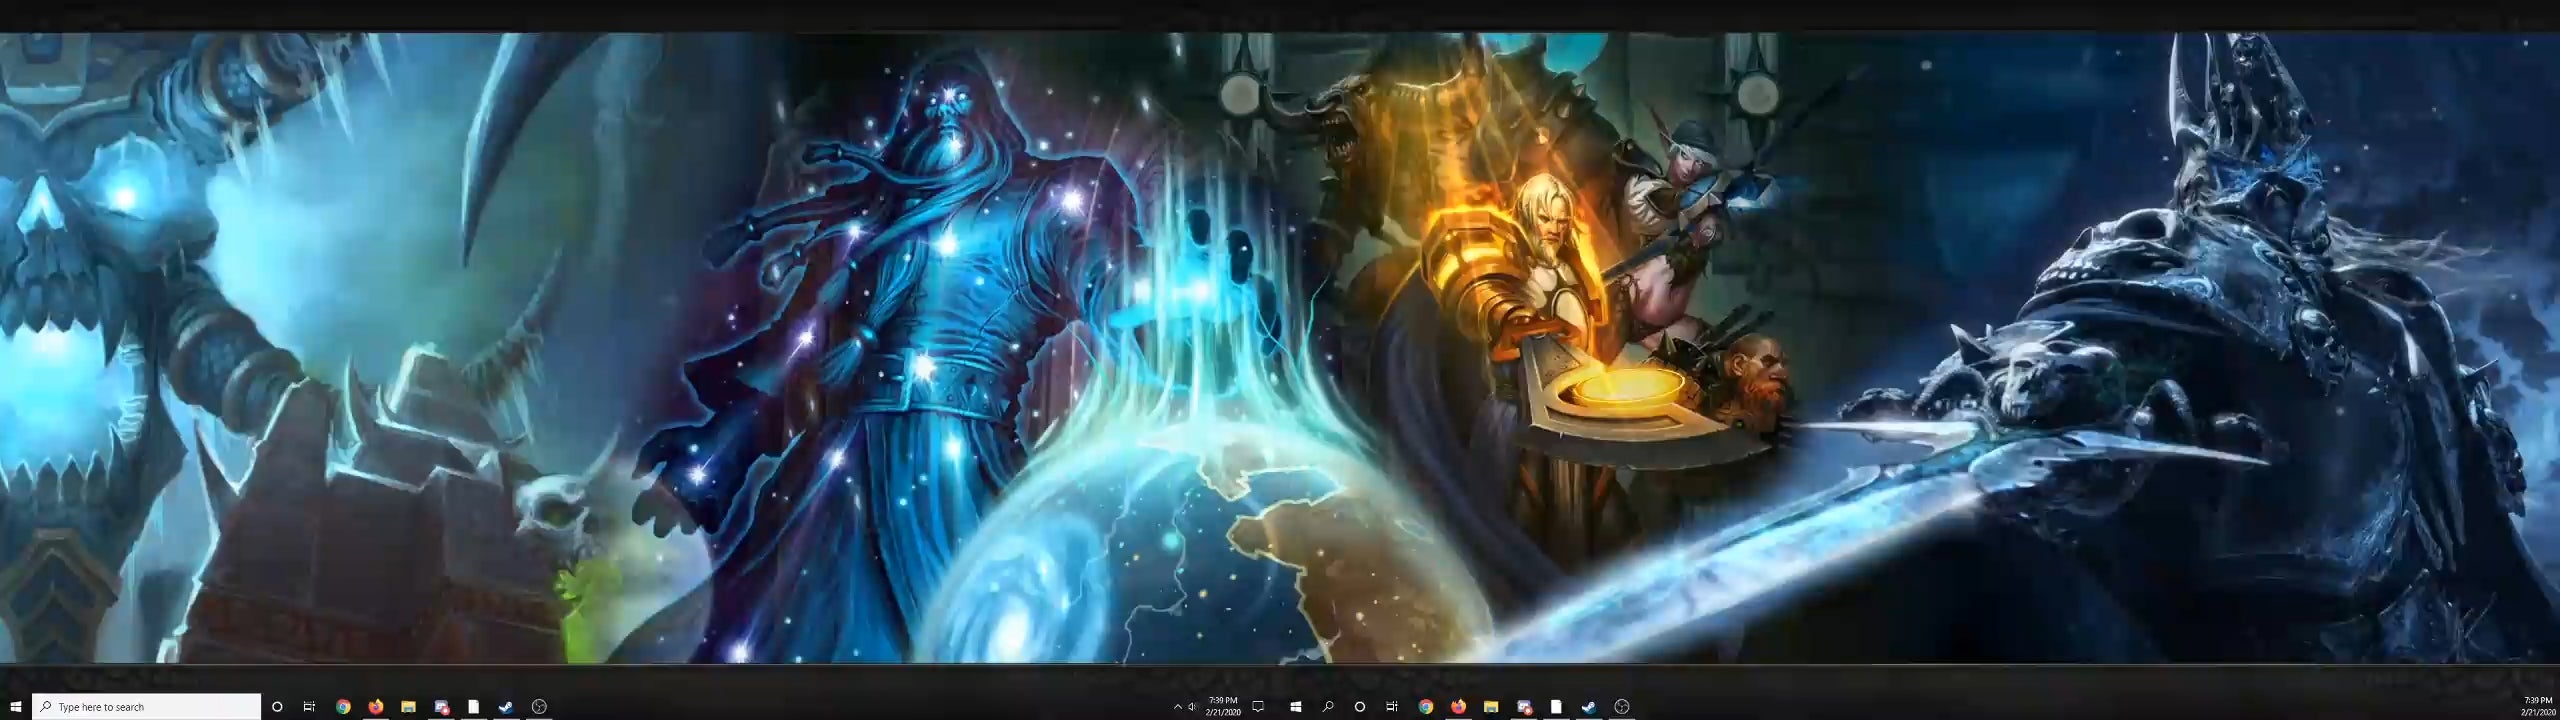 Dual Monitor Live Wallpapers